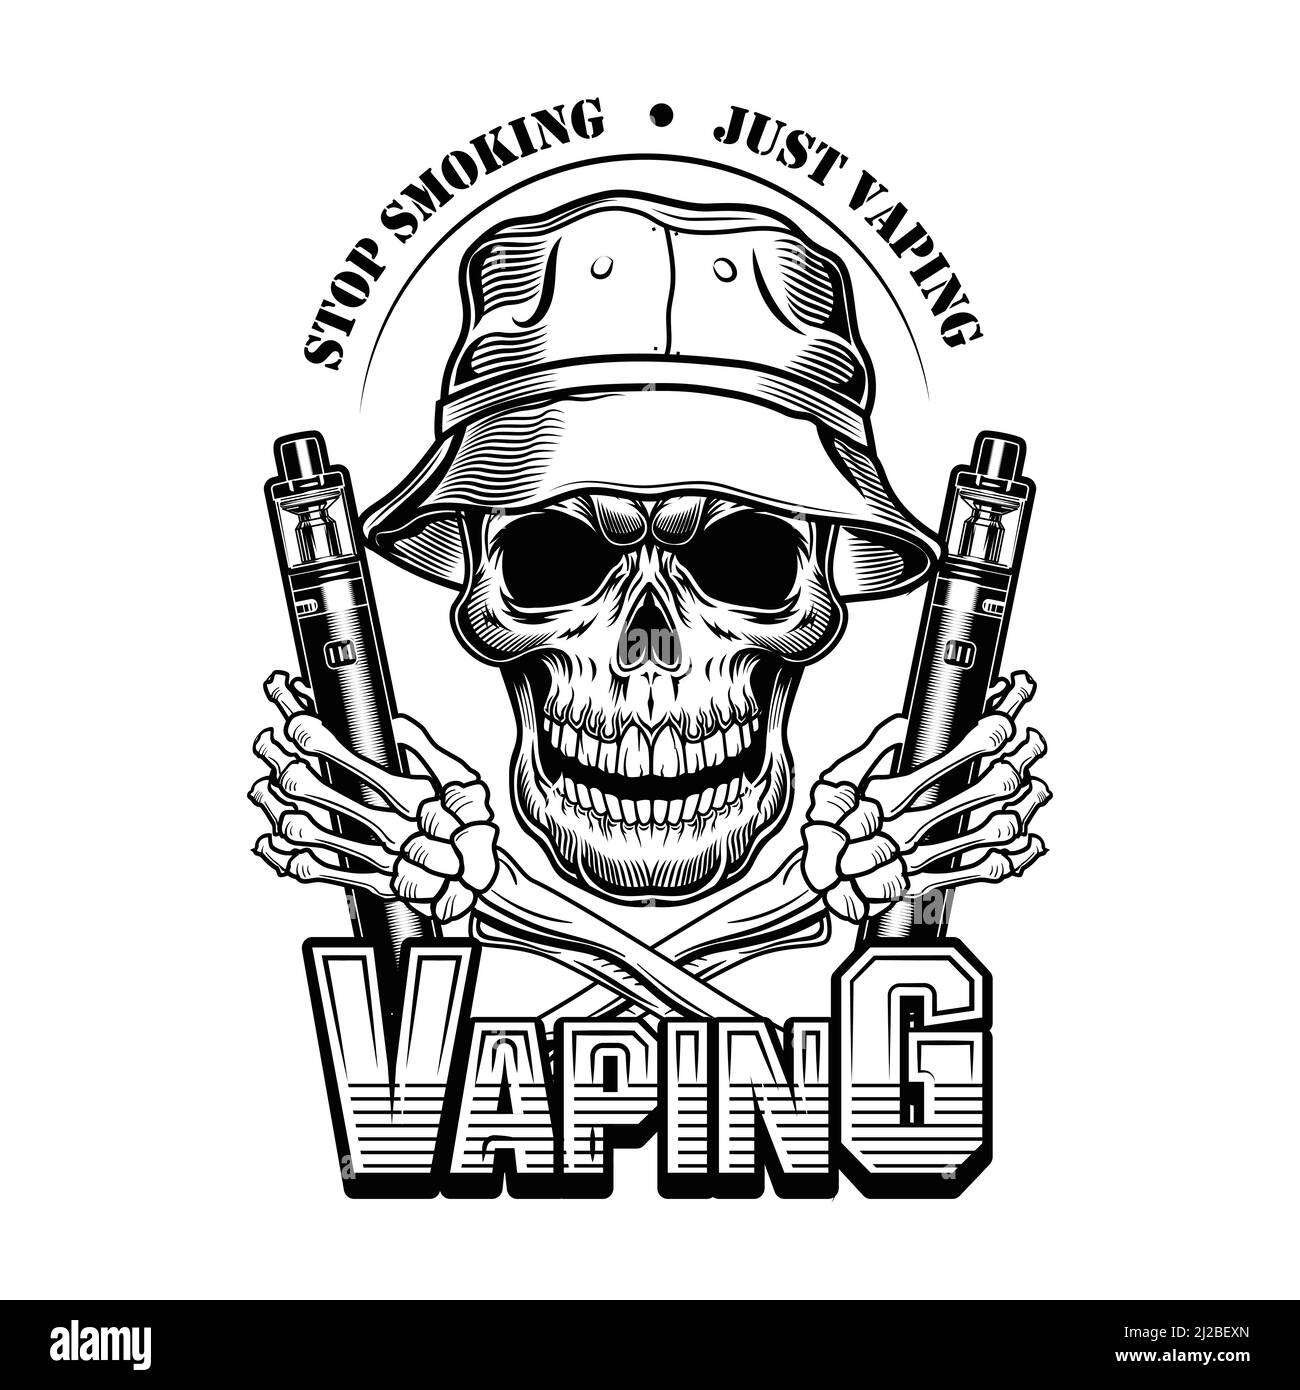 Vaping skull in panama vector illustration. Trendy character in hat with electronic cigarettes, stop smoking text. Retail concept for vape bar or stor Stock Vector